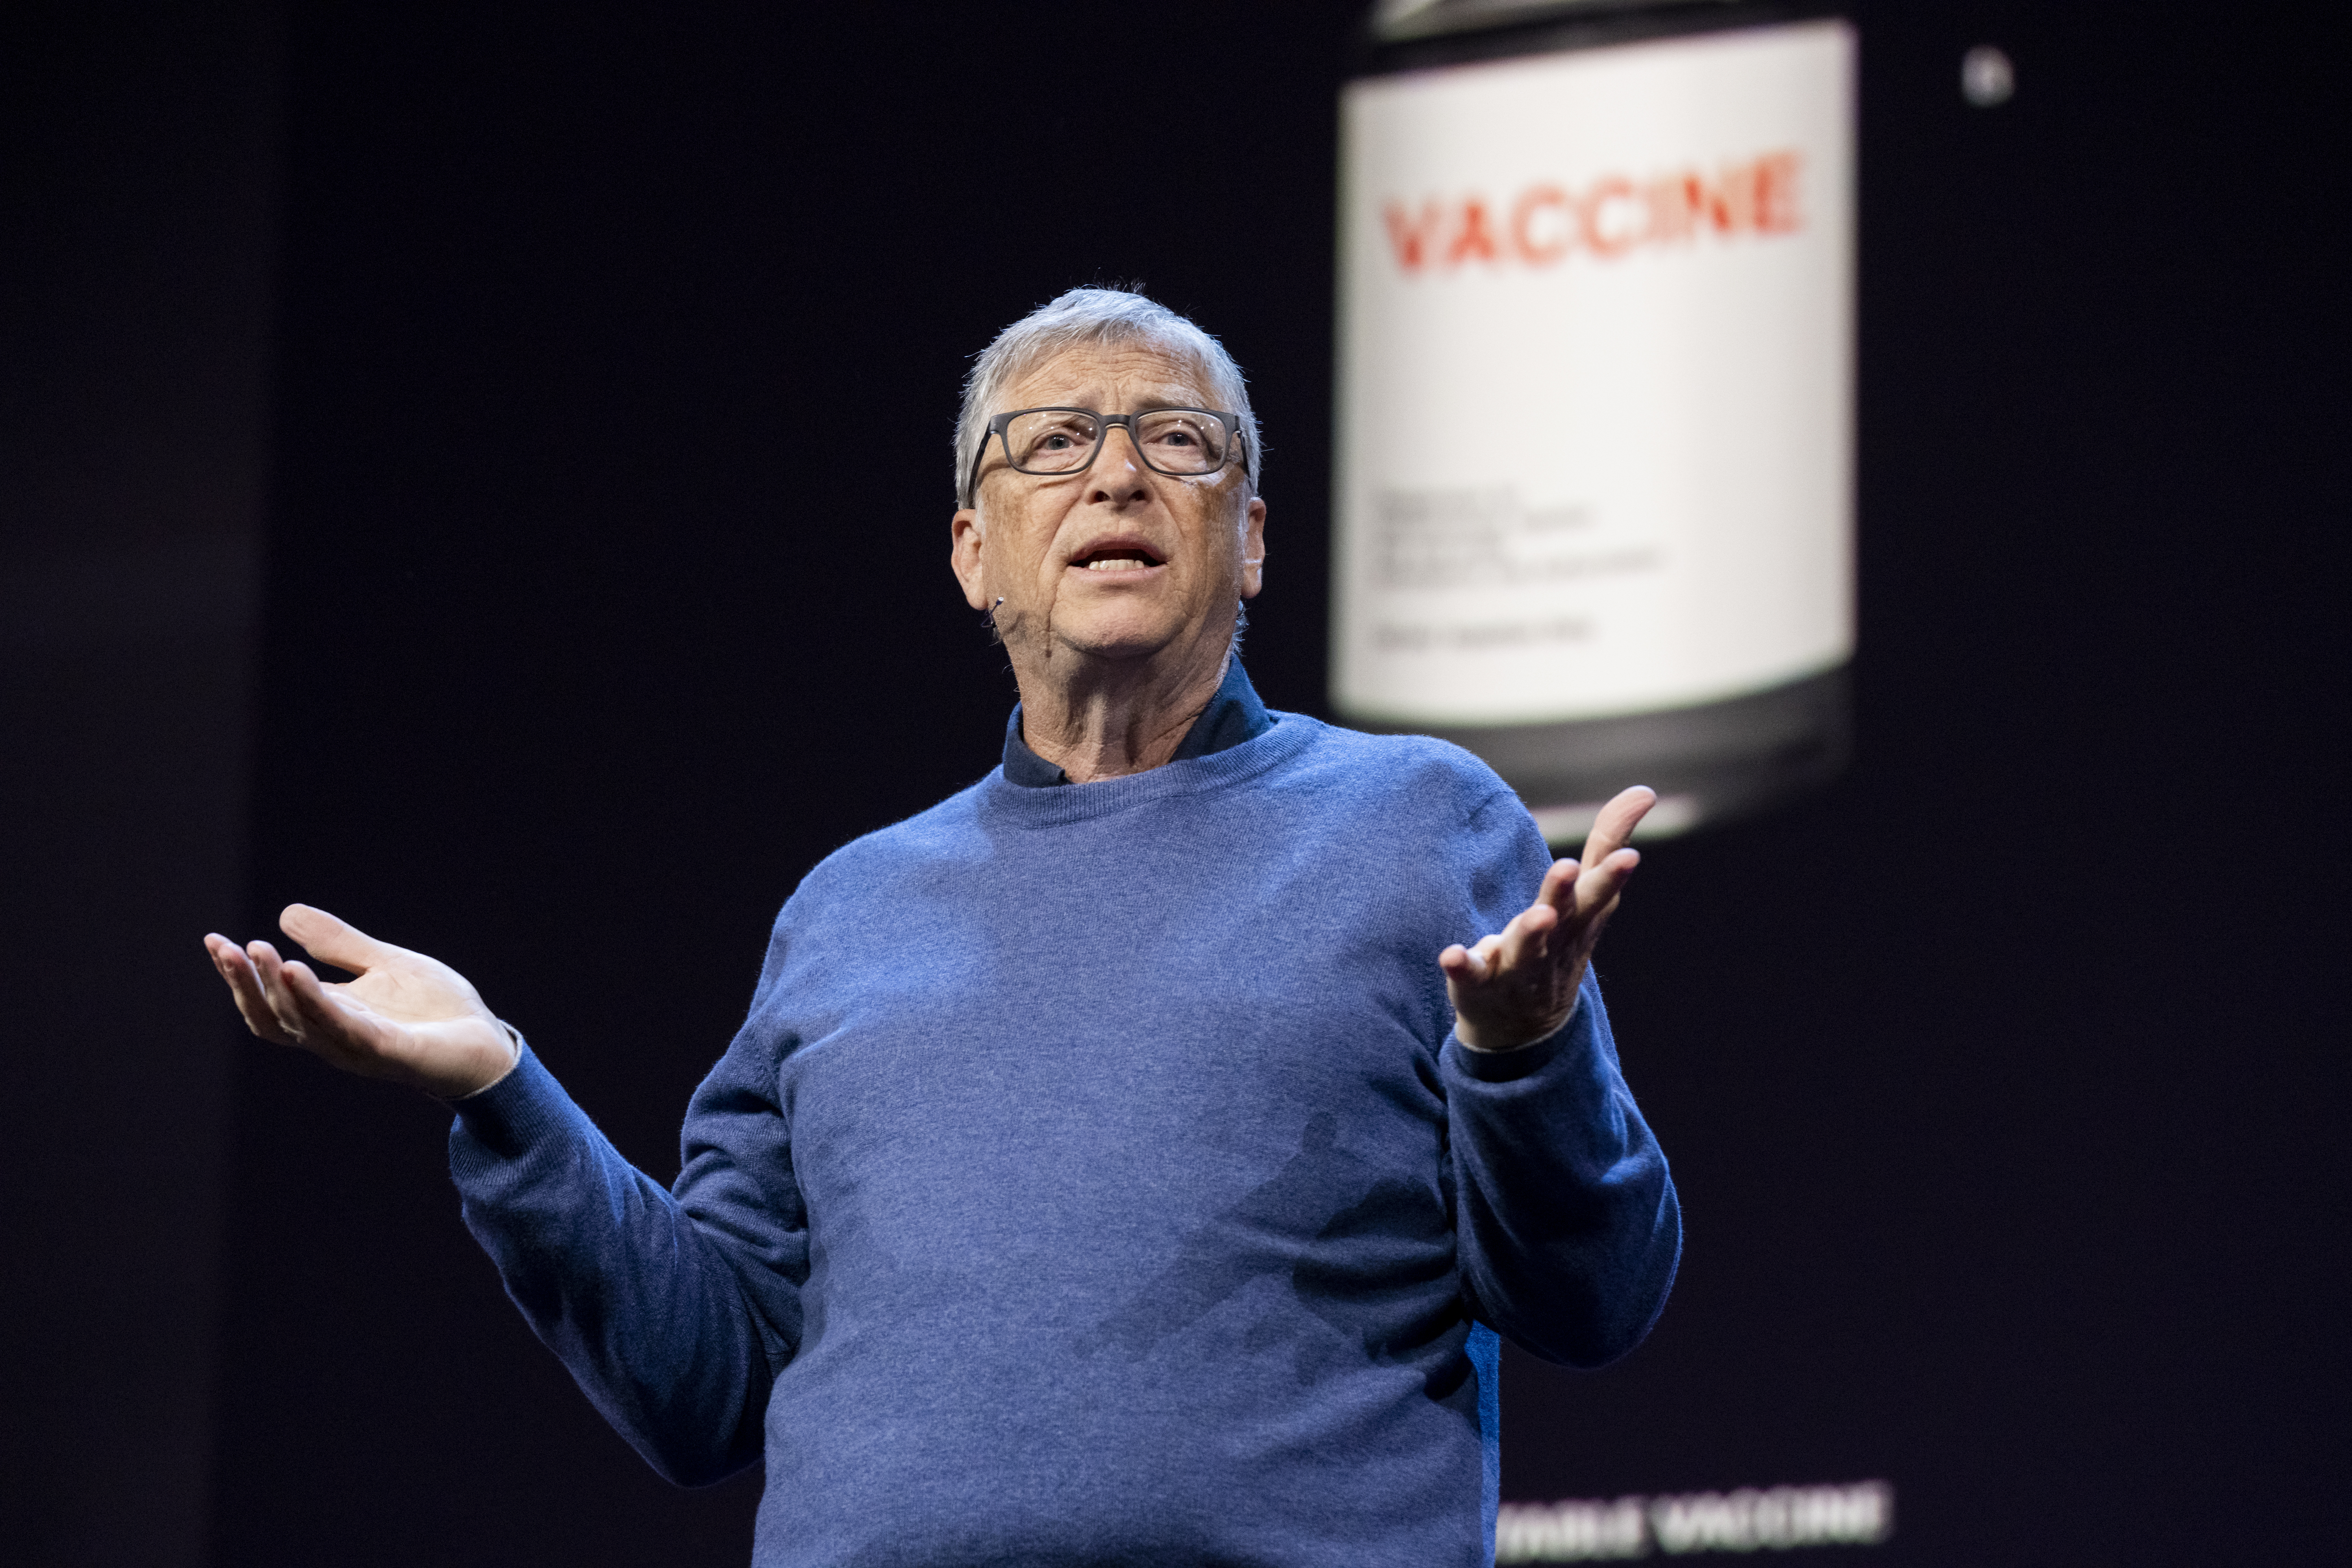 Bill Gates Has A Billion-Dollar Answer For Preventing Pandemics, But Is He Fronting The Cash To Make It Happen?